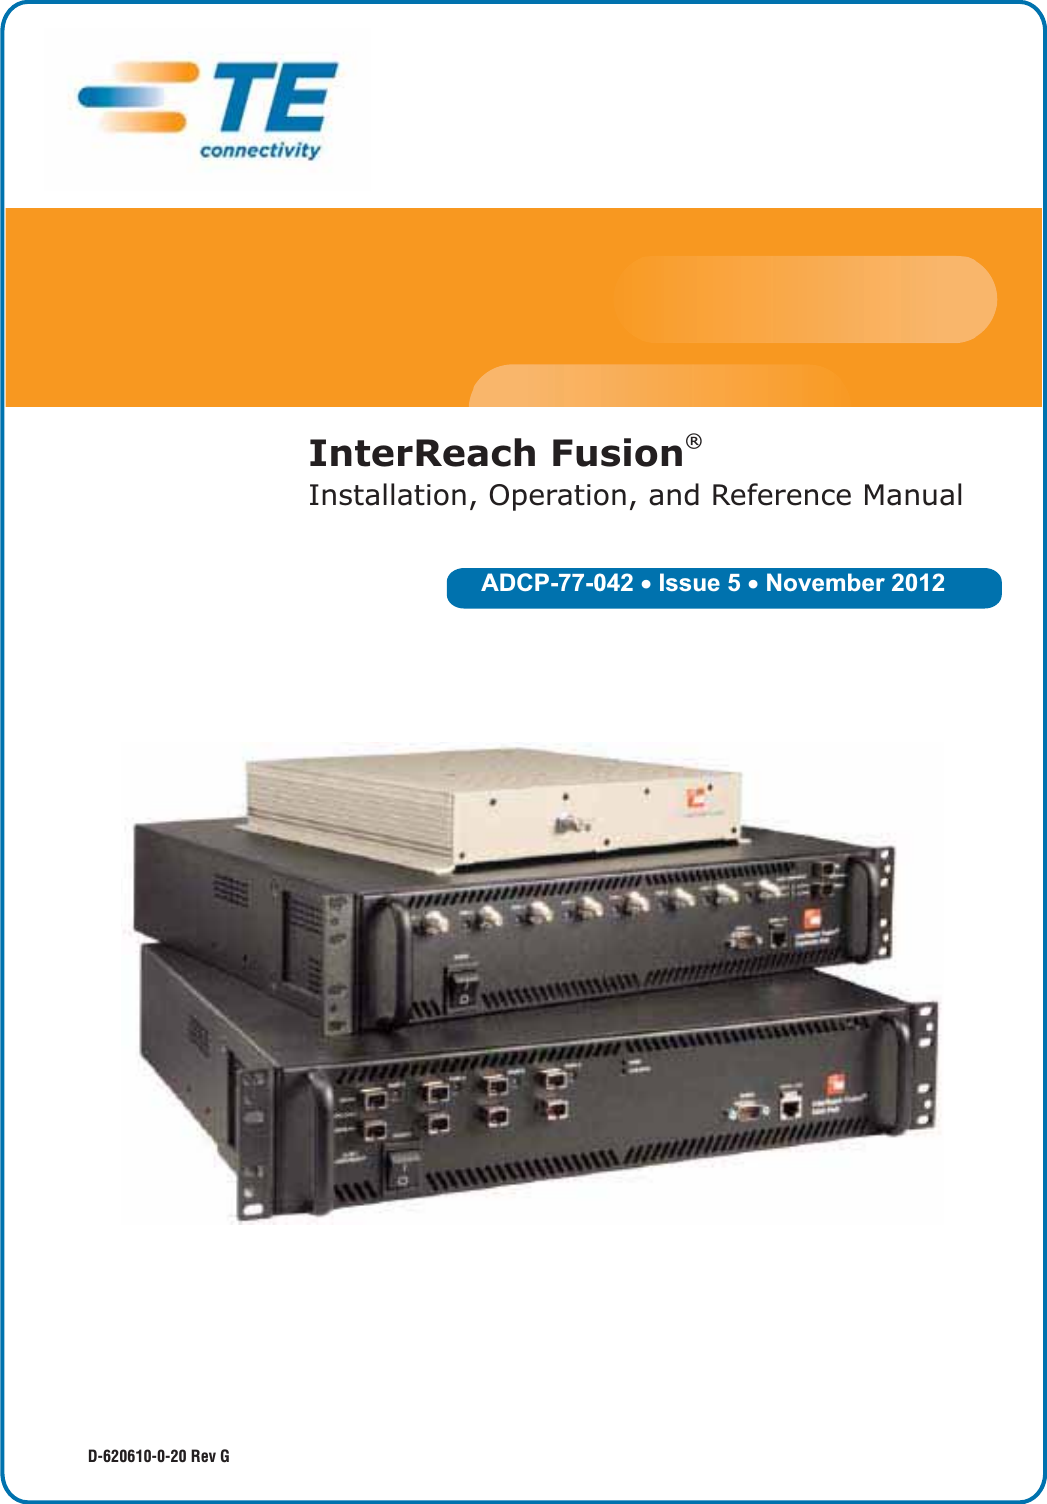 ADCP-77-042 x Issue 5 x November 2012D-620610-0-20 Rev GInterReach Fusion® Installation, Operation, and Reference Manual